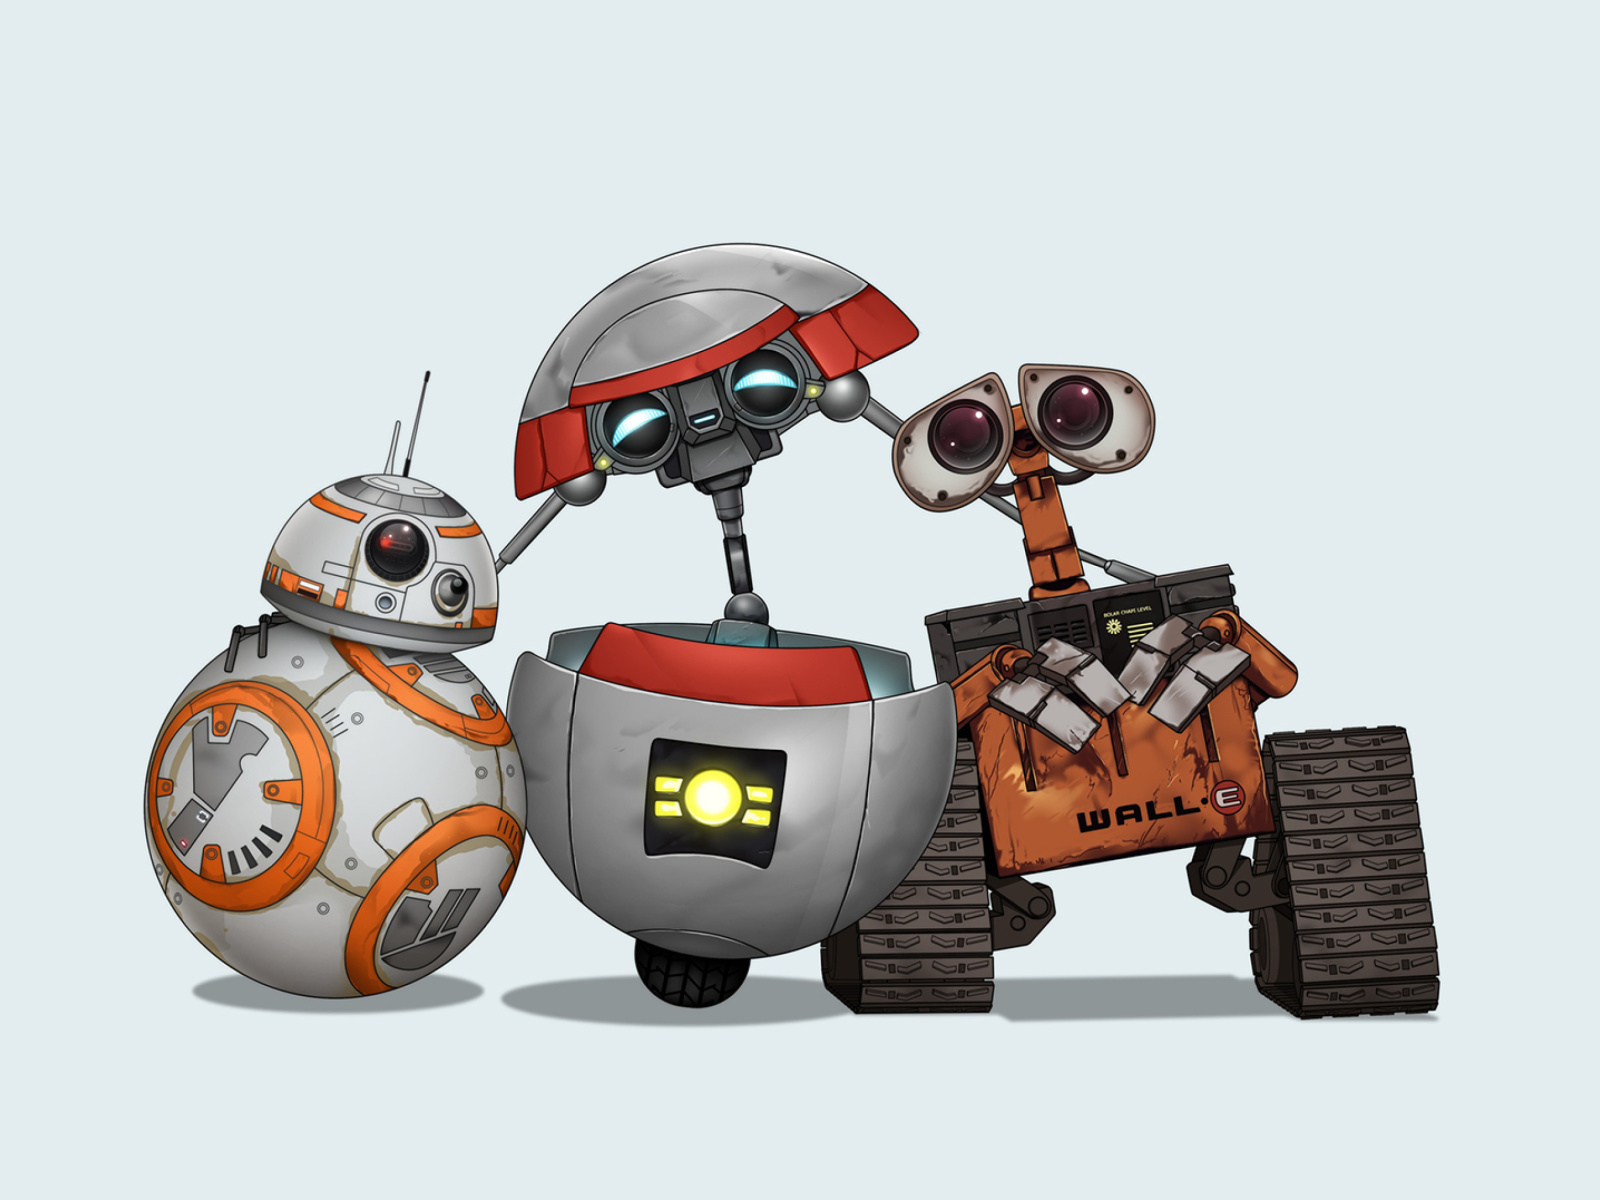 Star Wars and Walle wallpaper 1600x1200